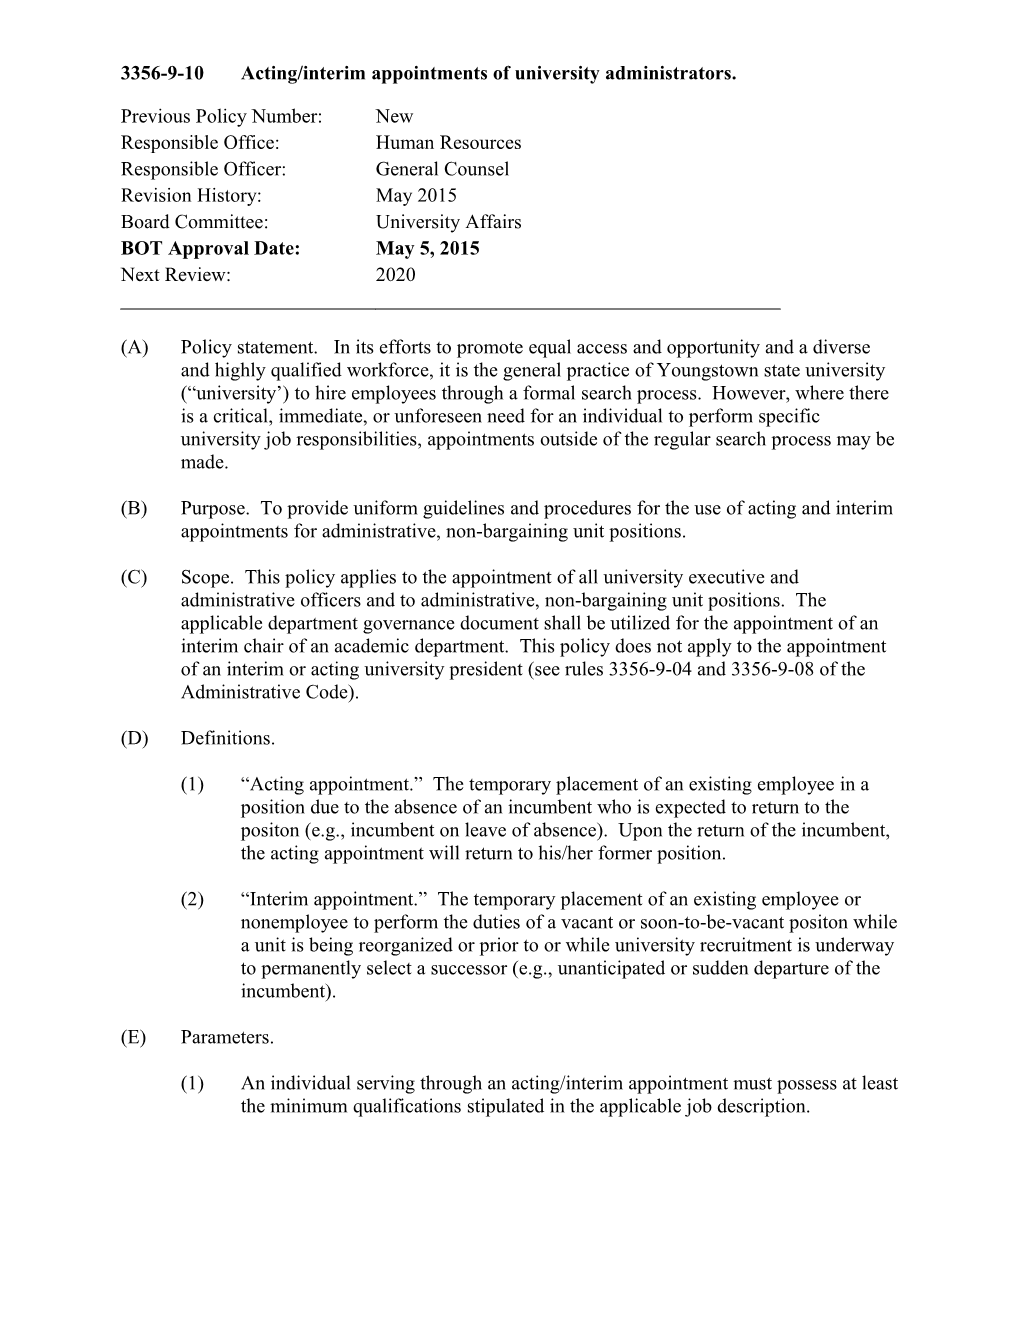 3356-9-10Acting/Interim Appointments of University Administrators